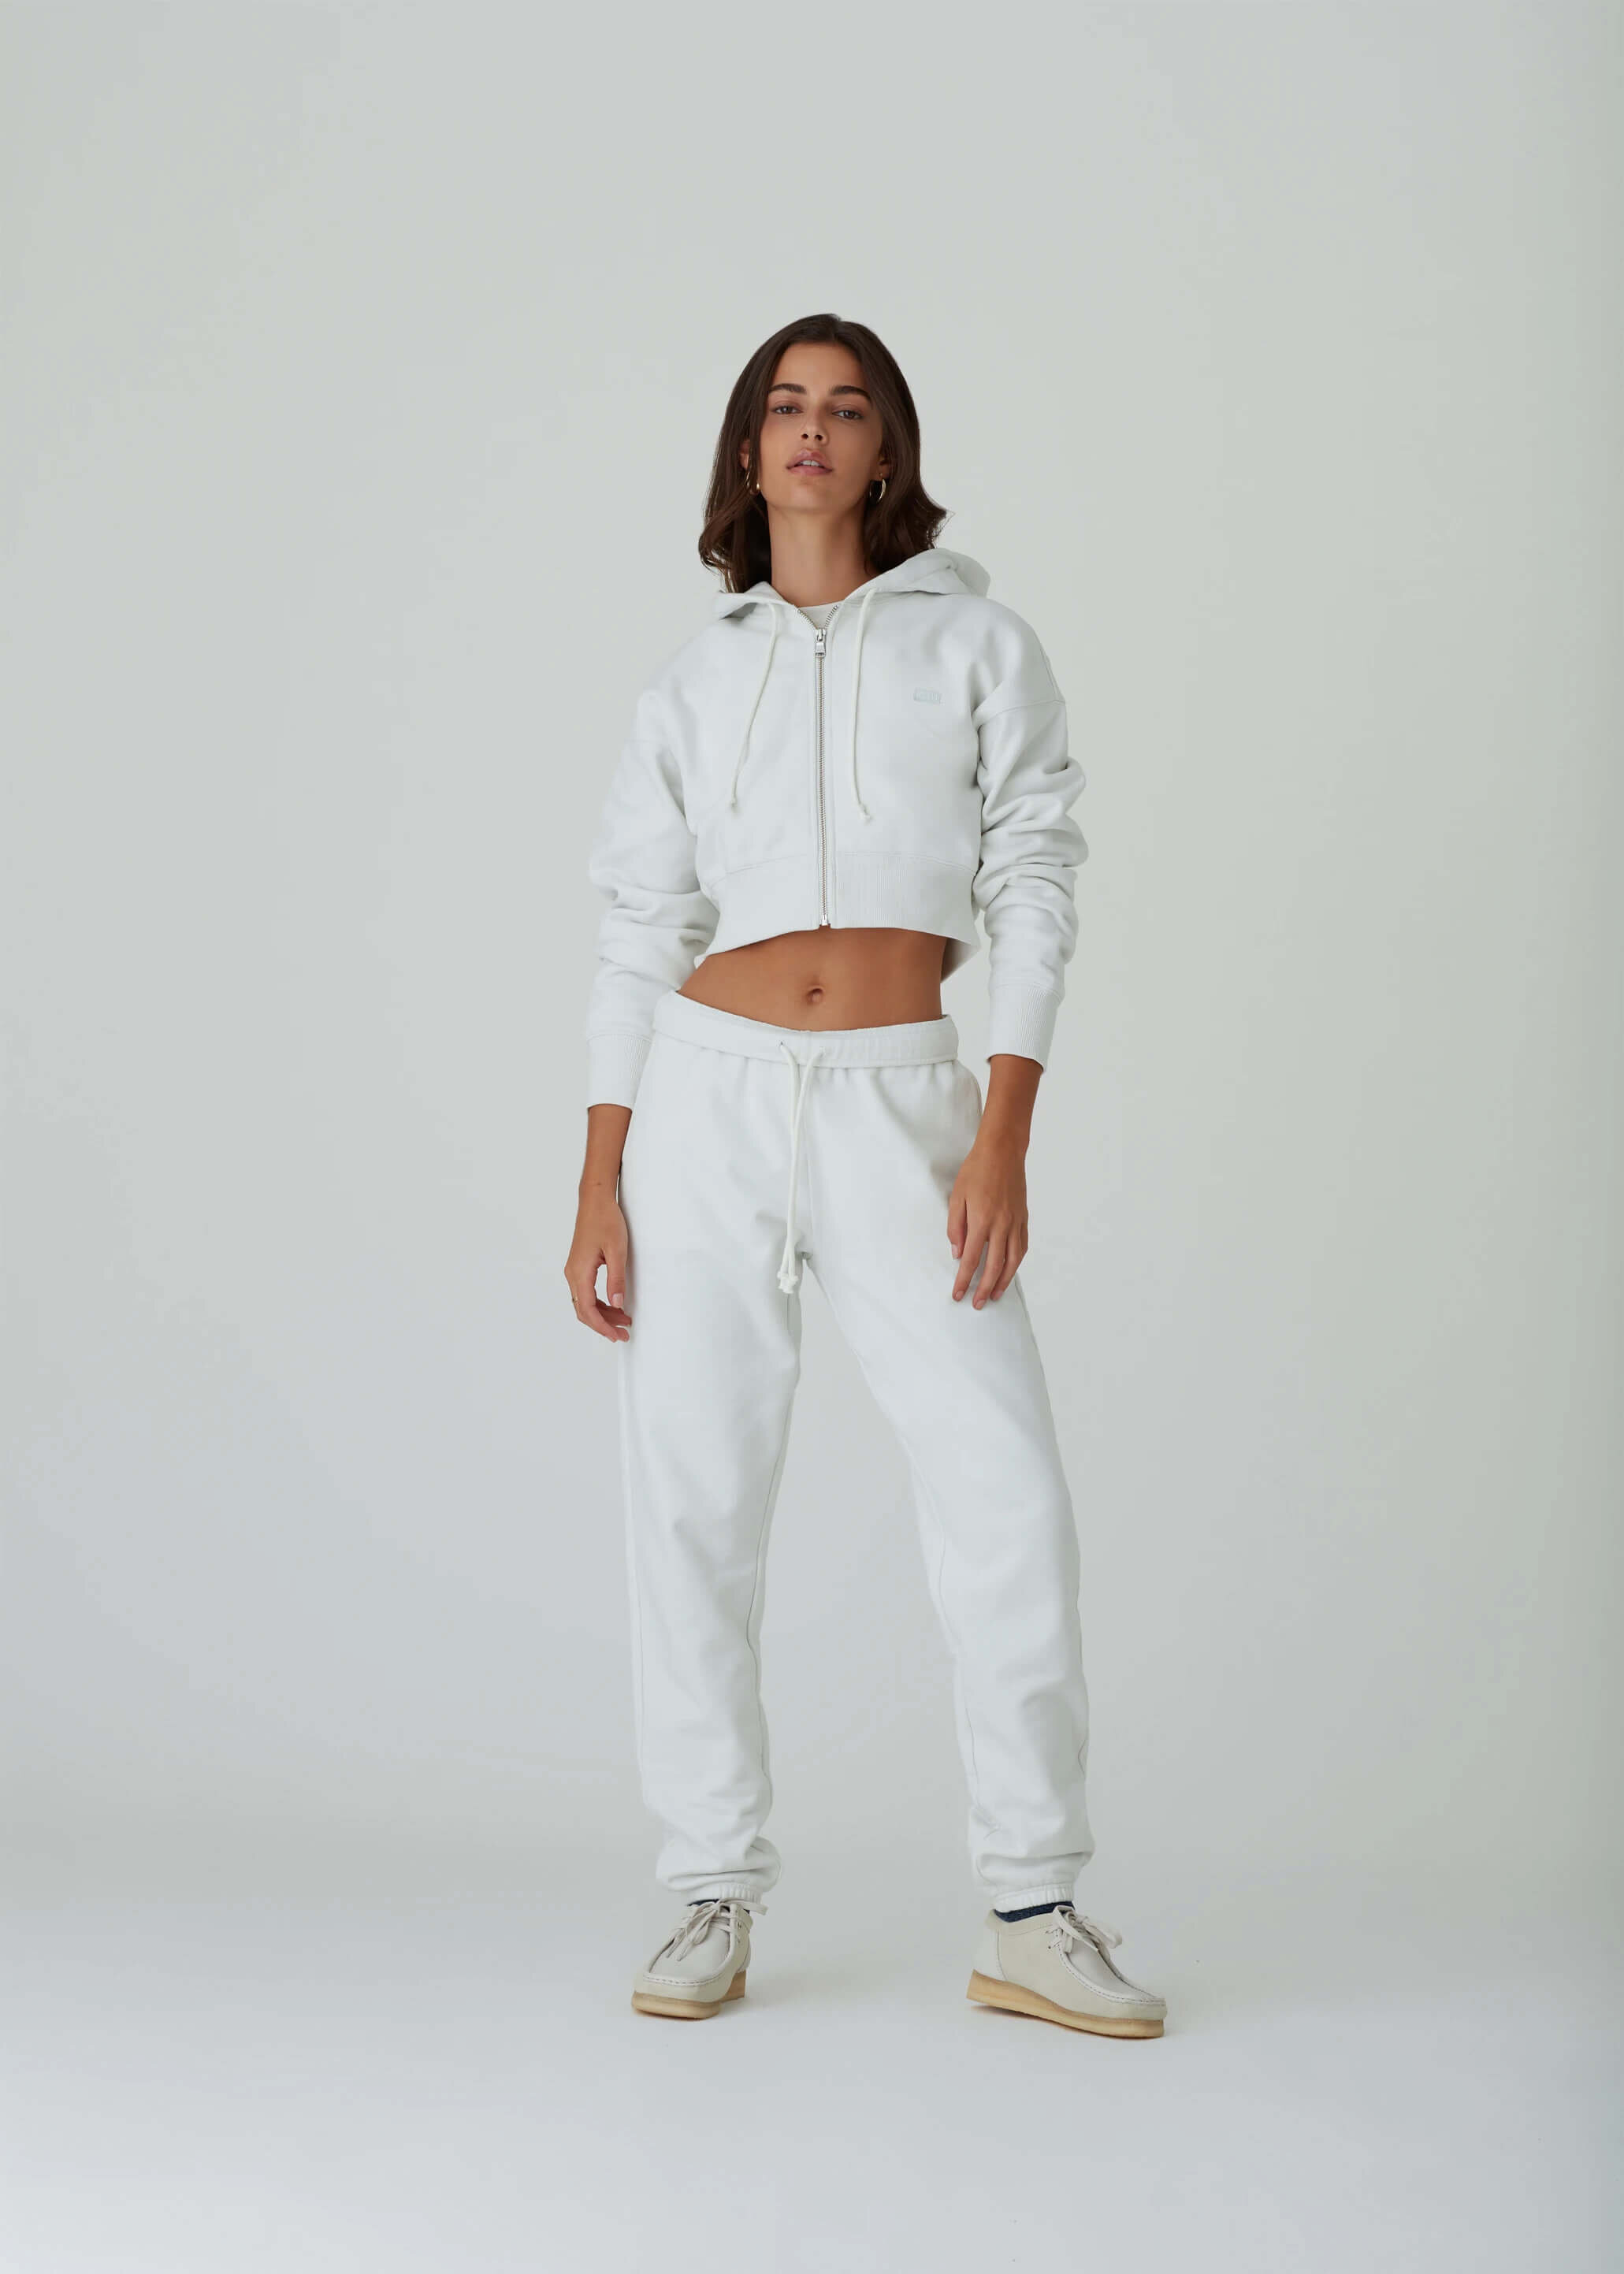 CNK-Kith-Spring-1-2021-Collection-Look-14.jpeg